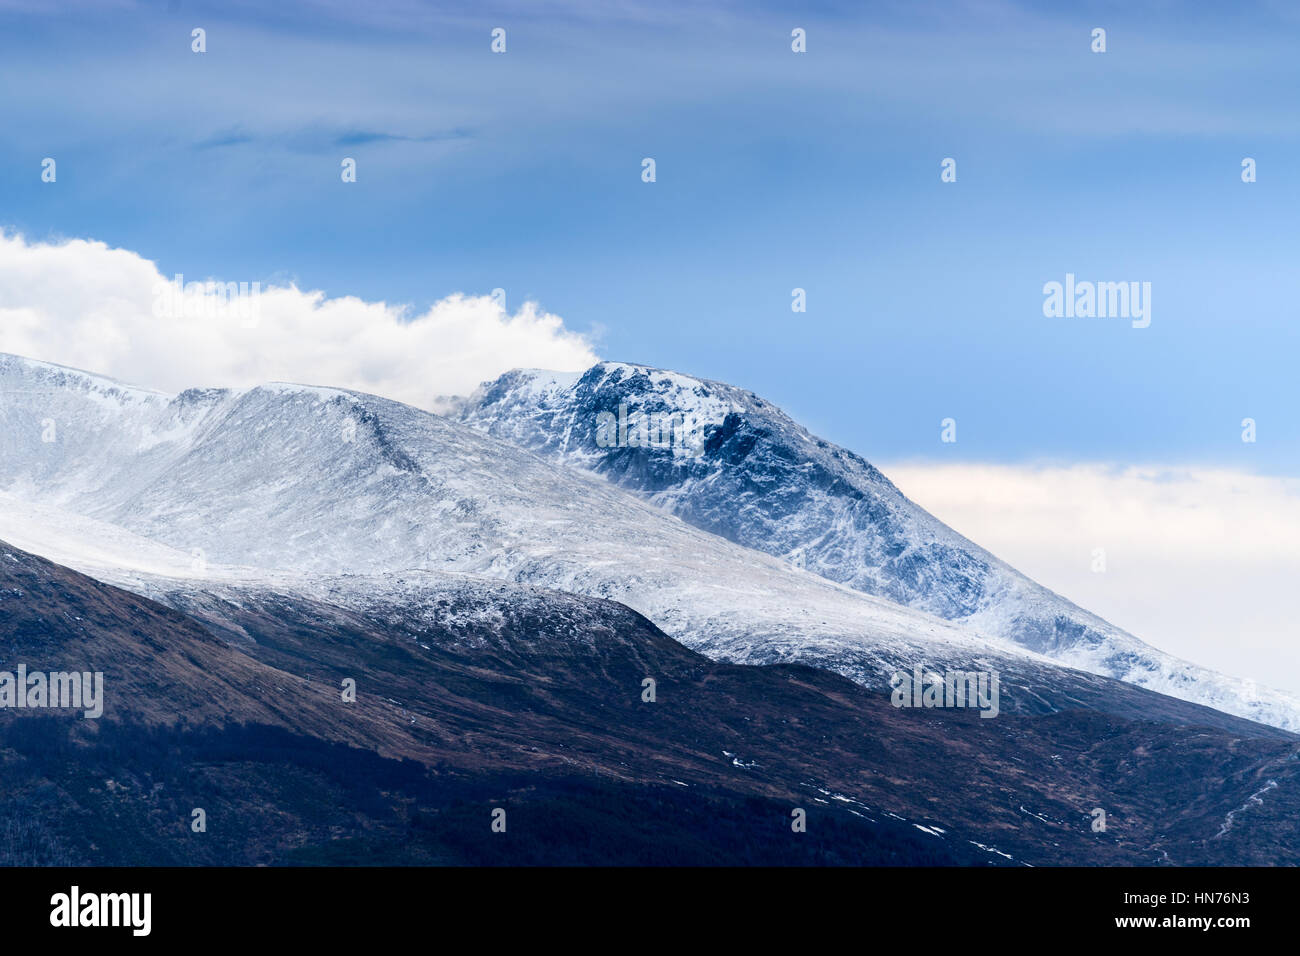 North face of Ben Nevis, the highest mountain in Britain at 1345 metres high. Stock Photo